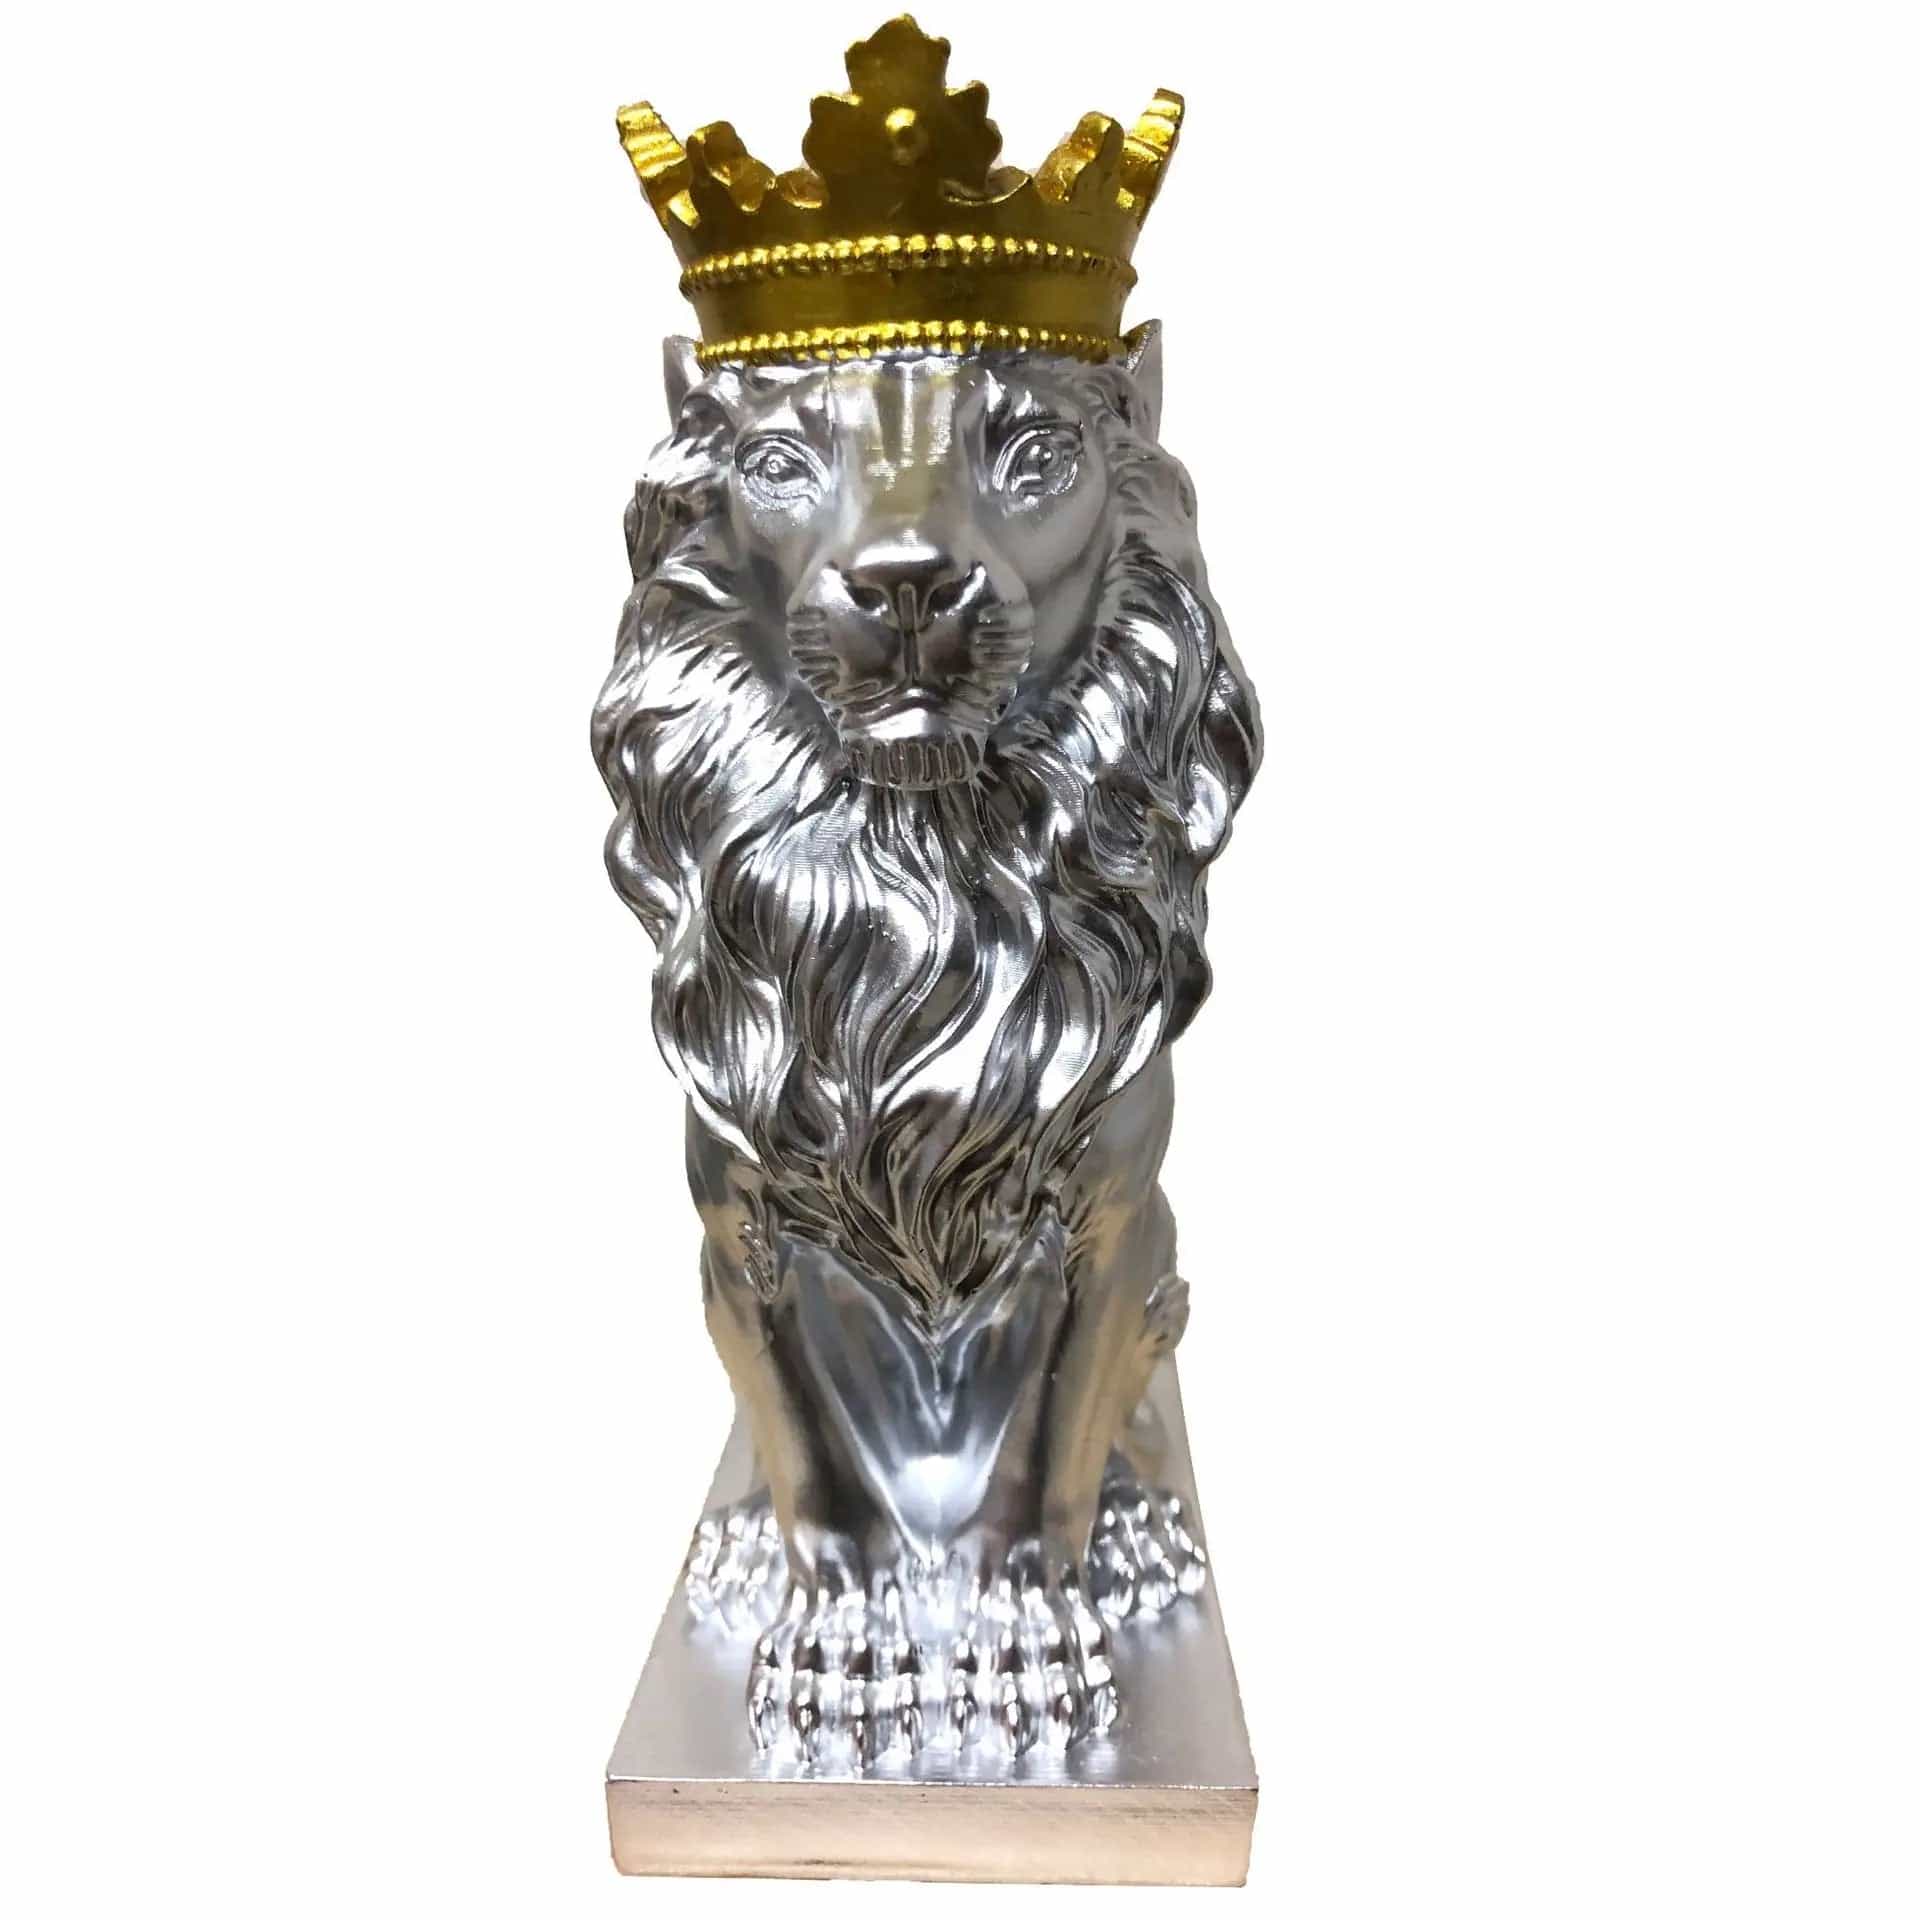 Nordic Resin Lion Sculpture with Crown - Majestic Animal Figurine Statue